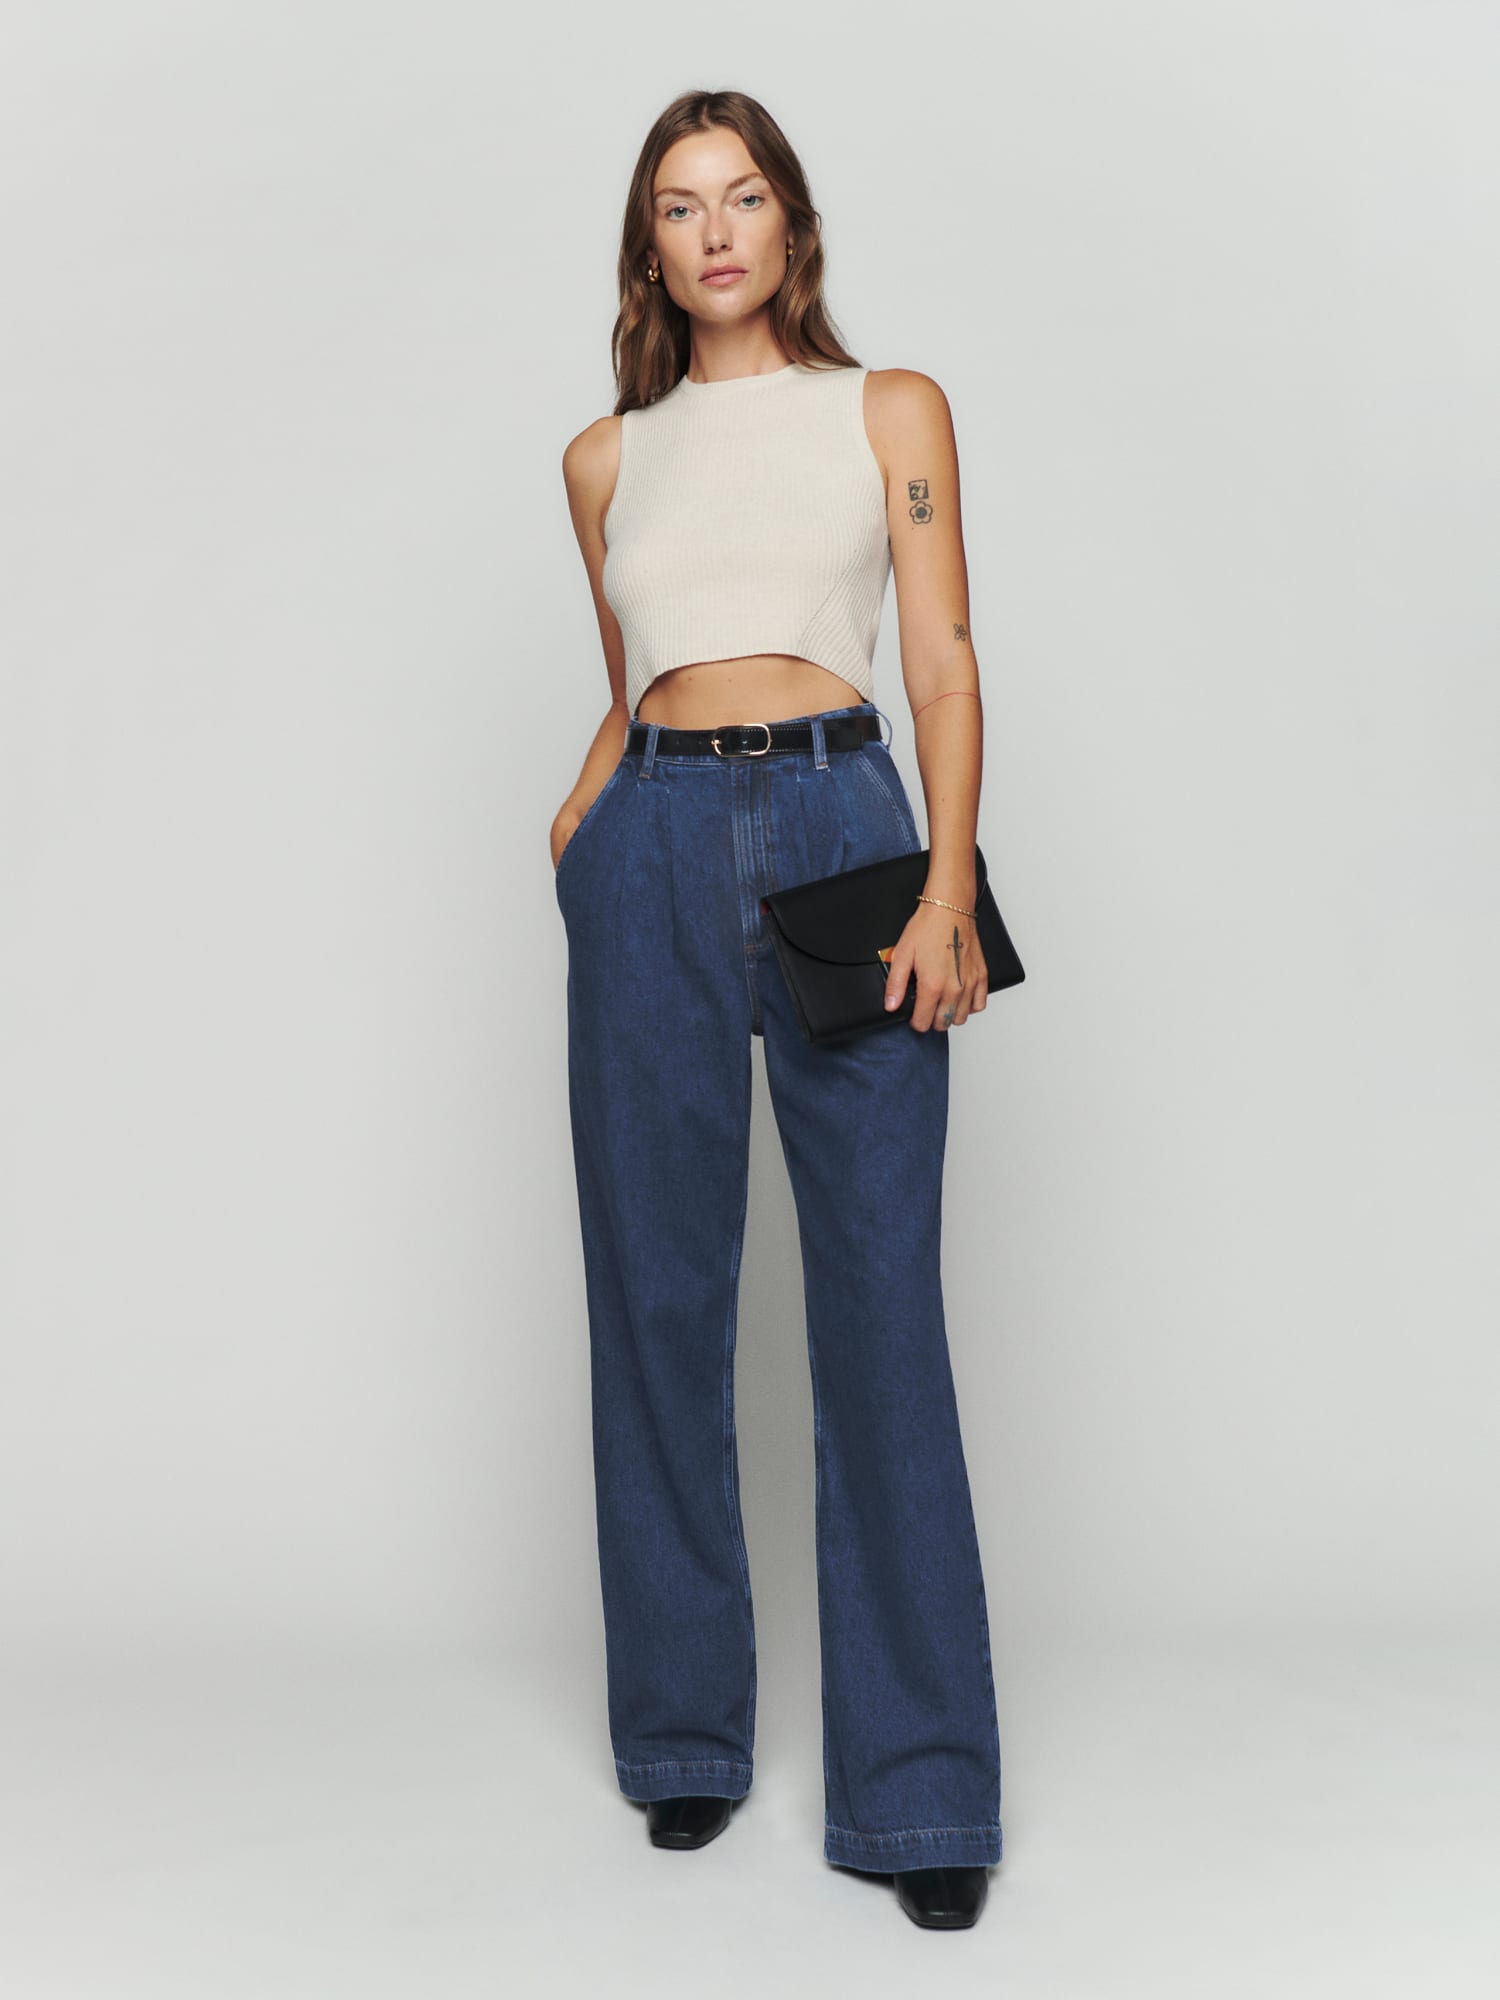 Montauk Pleated High Rise Jeans - Sustainable Denim | Reformation